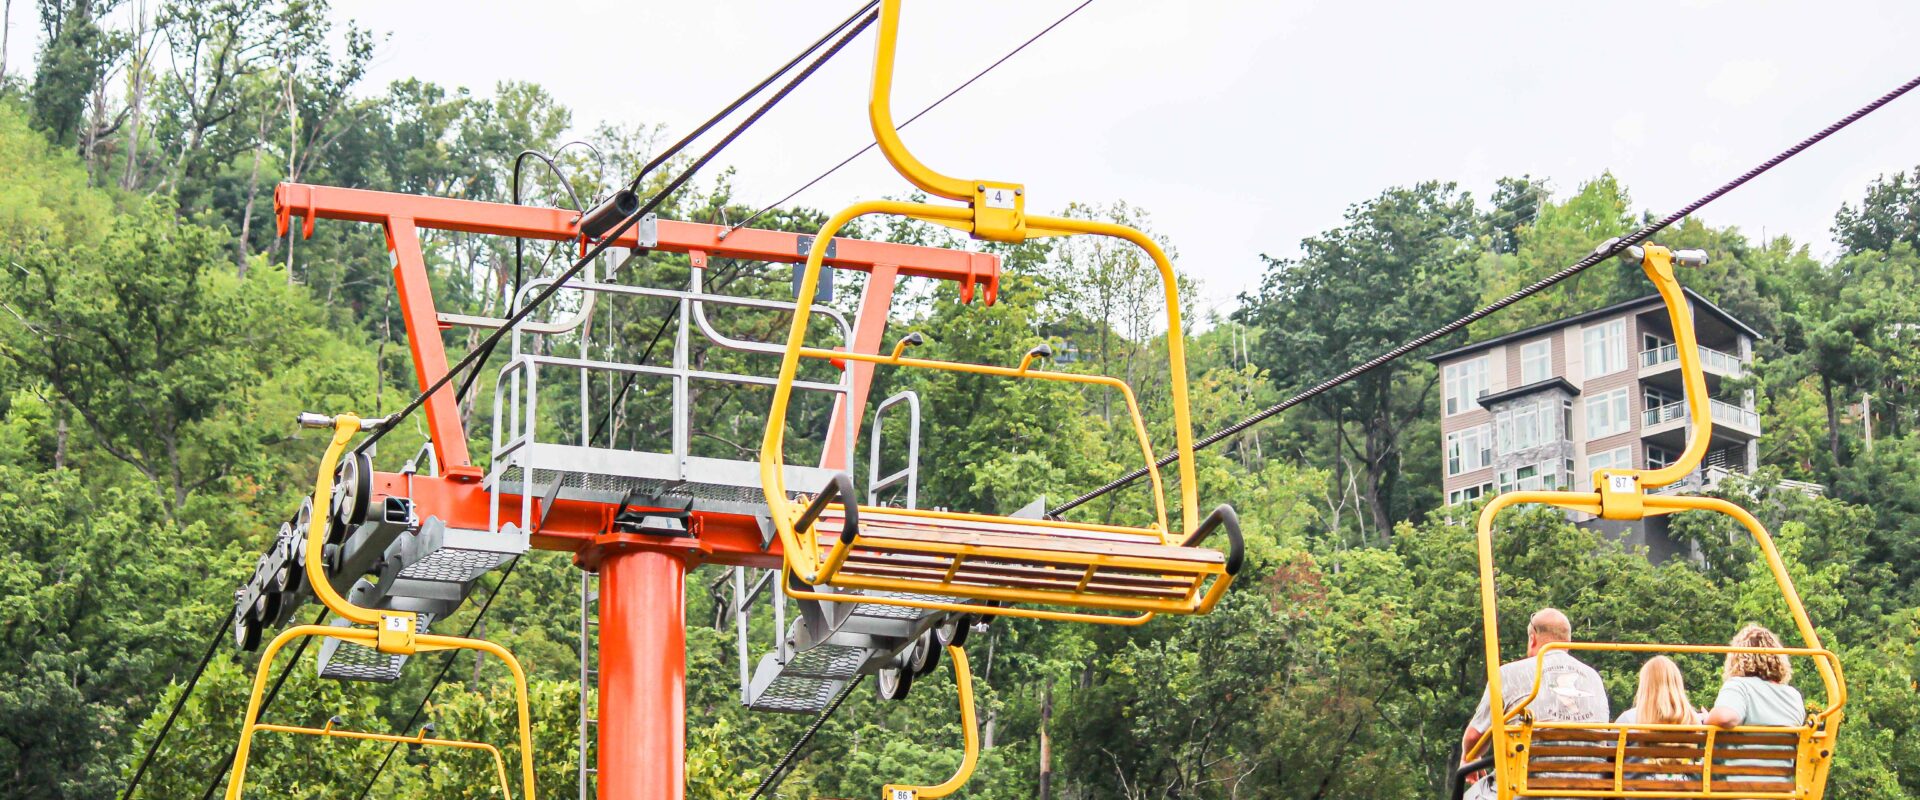 What Can $100 Get In Gatlinburg - You Can Go To Skylift Park